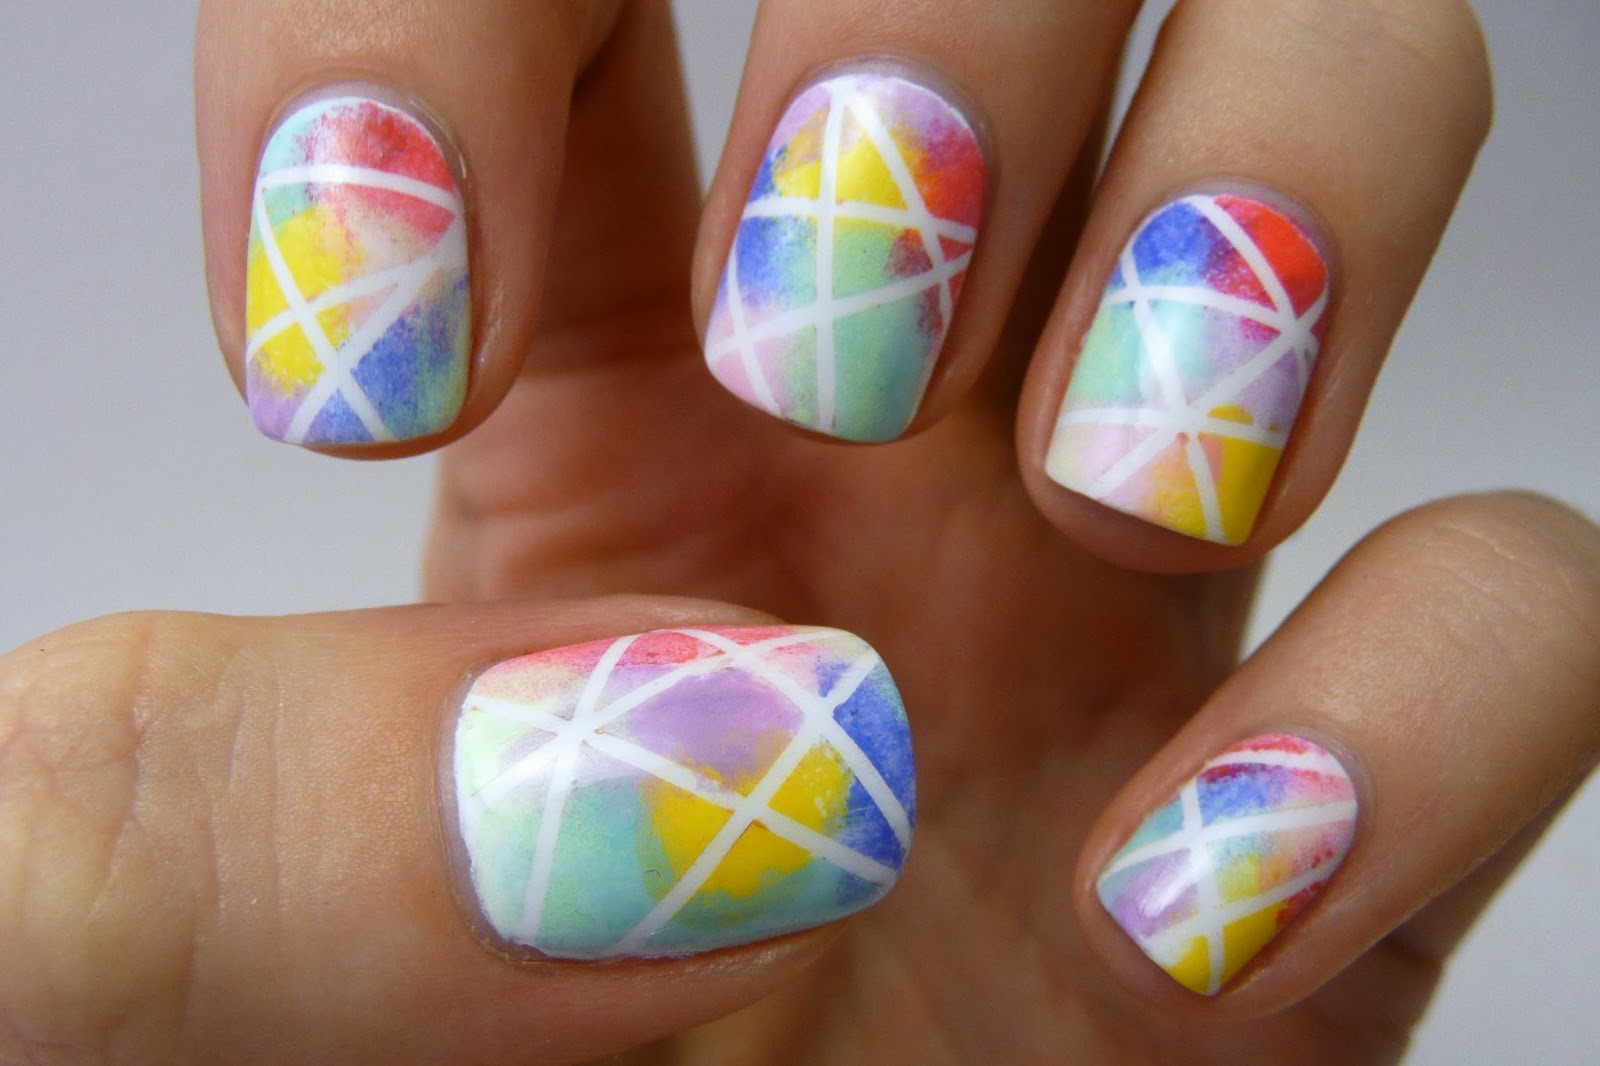 2. Line Decoration for Nails - wide 7